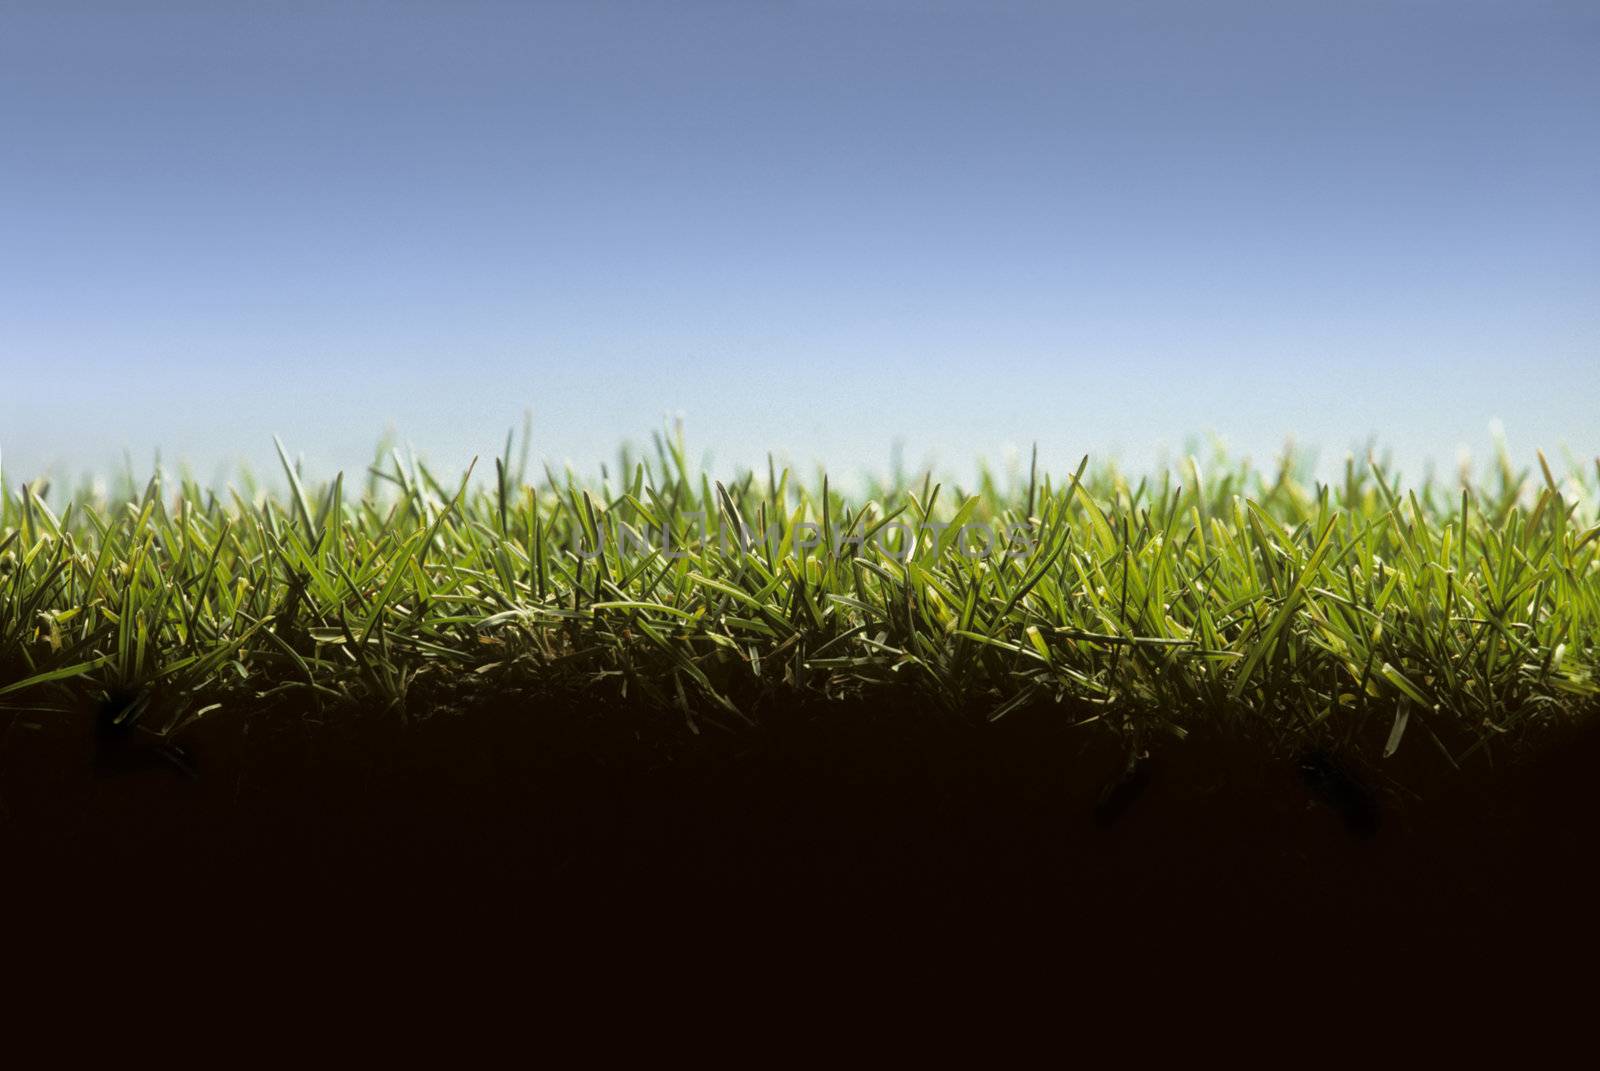 Cross section of lawn showing blades of grass at ground level